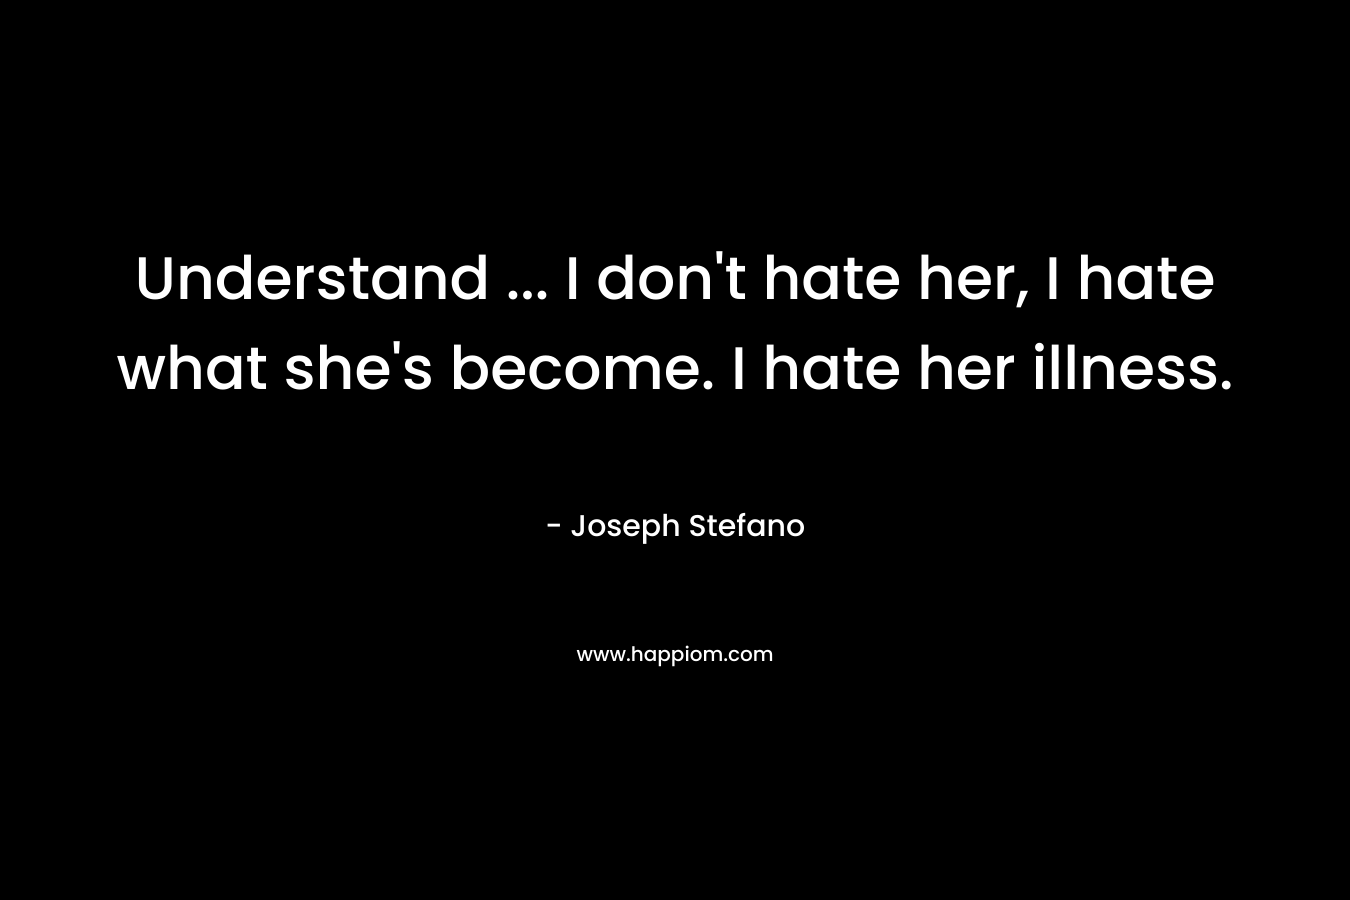 Understand … I don’t hate her, I hate what she’s become. I hate her illness. – Joseph Stefano